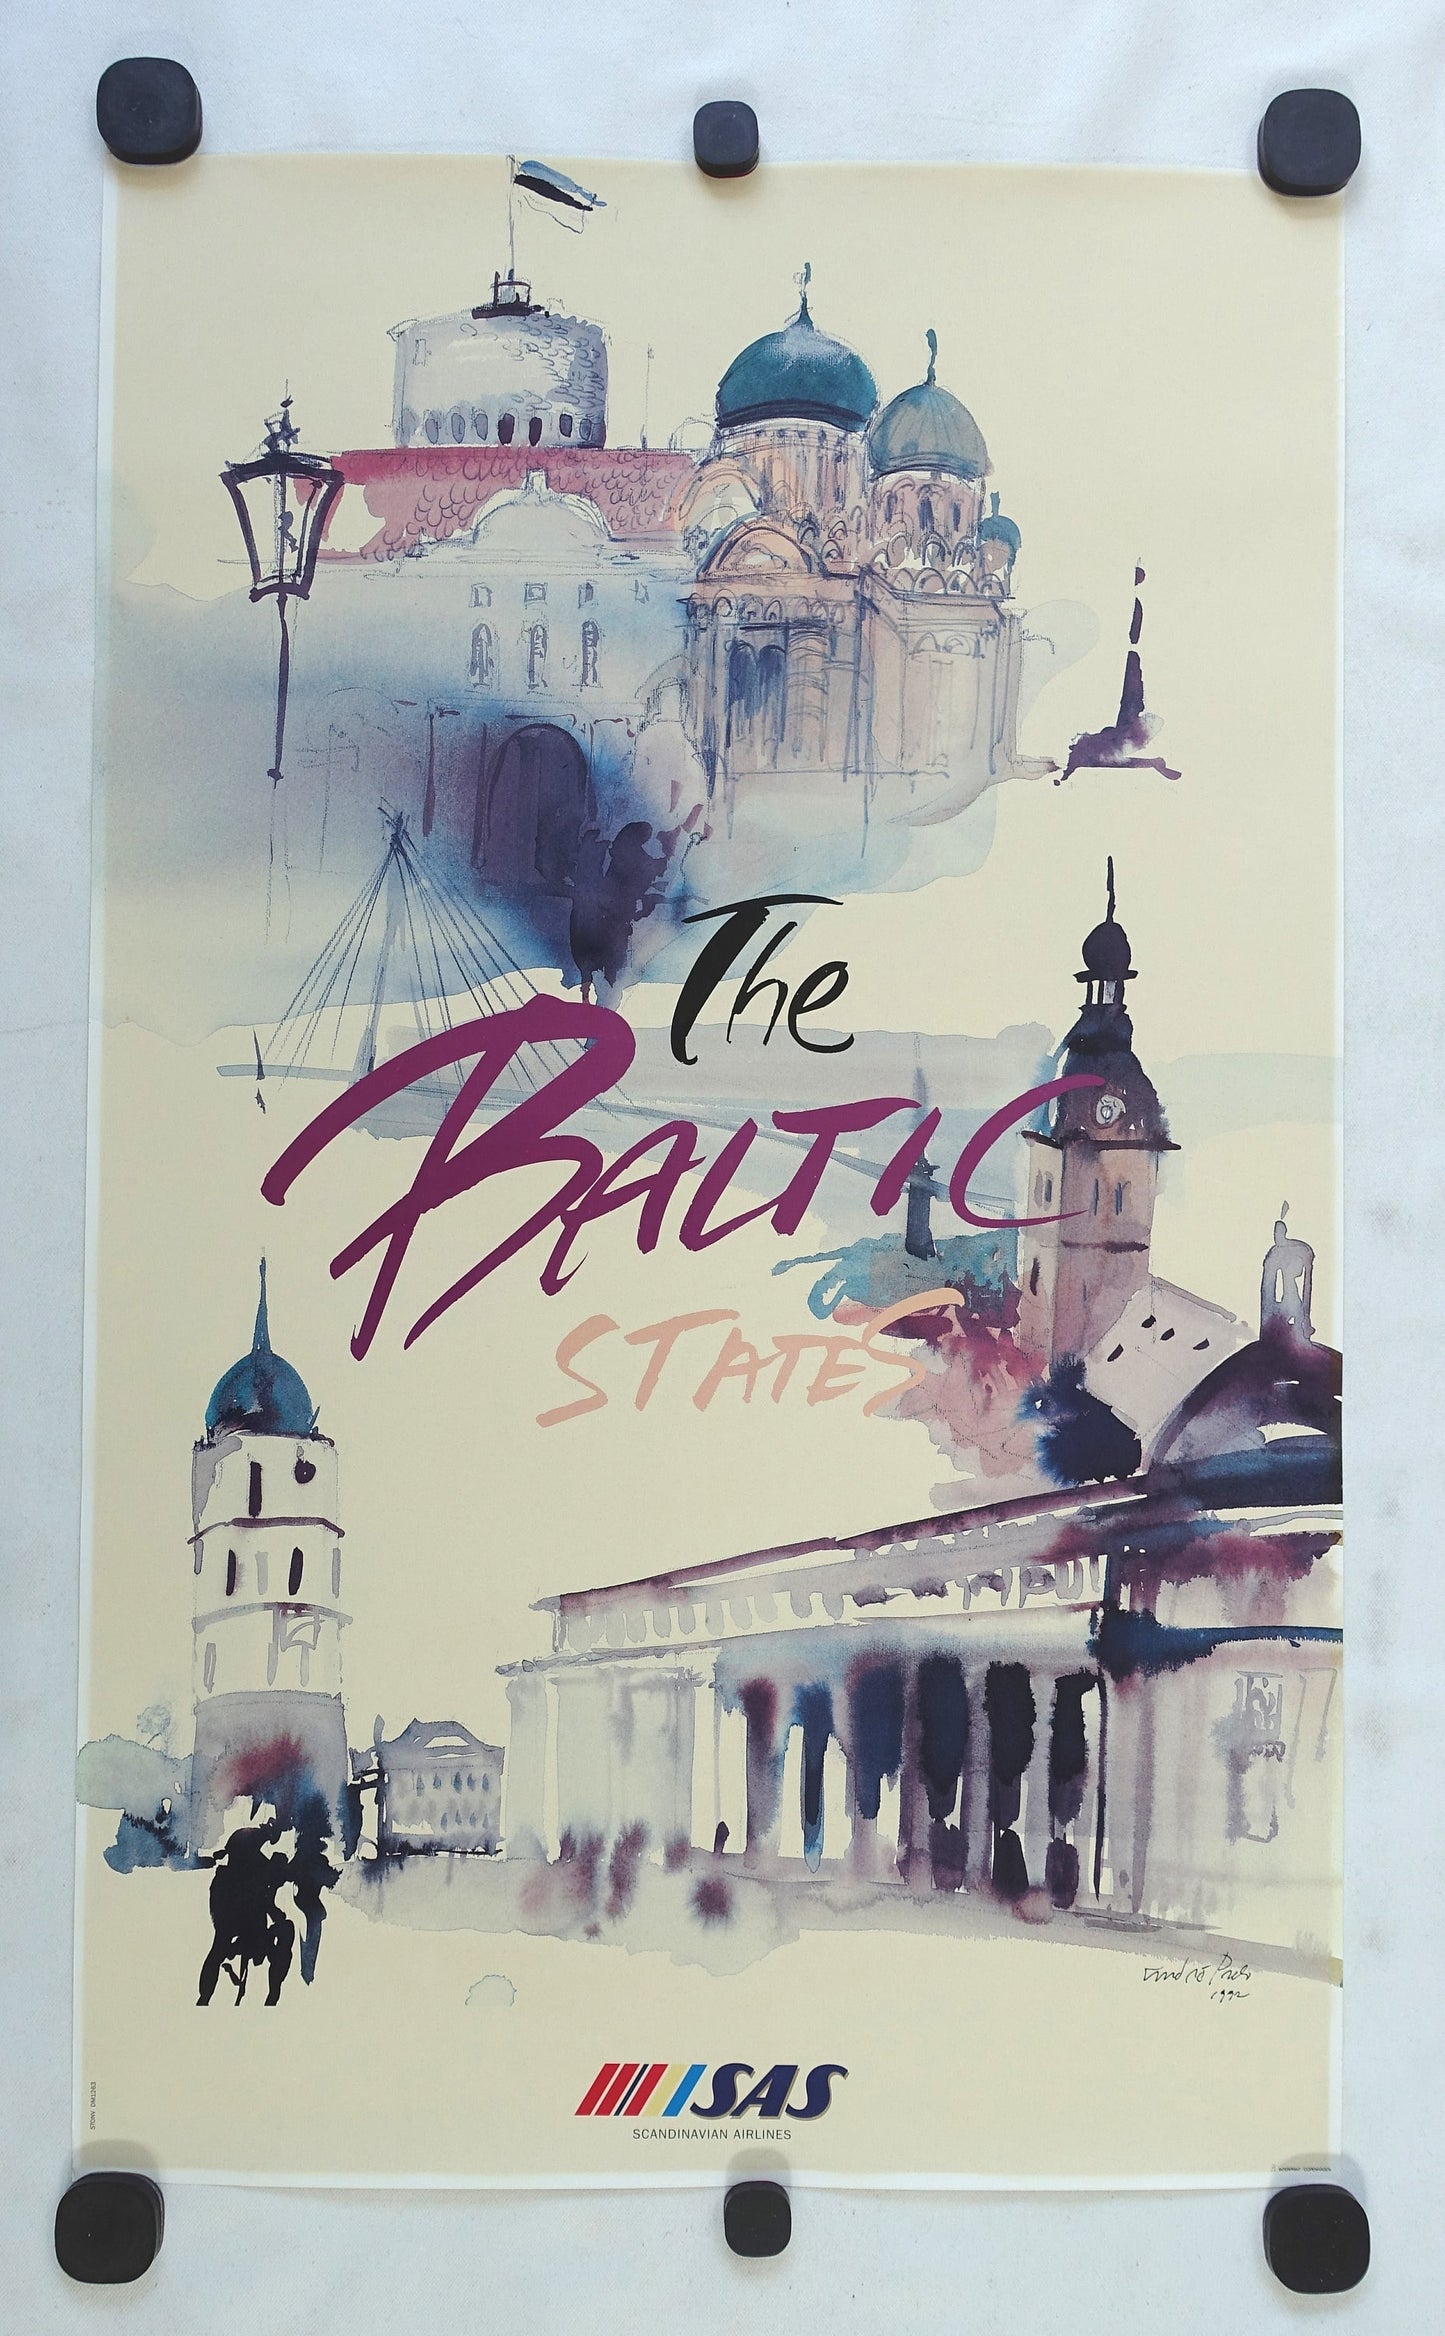 1992 Baltic States Travel Poster by Scandinavian Airlines - Original Vintage Poster